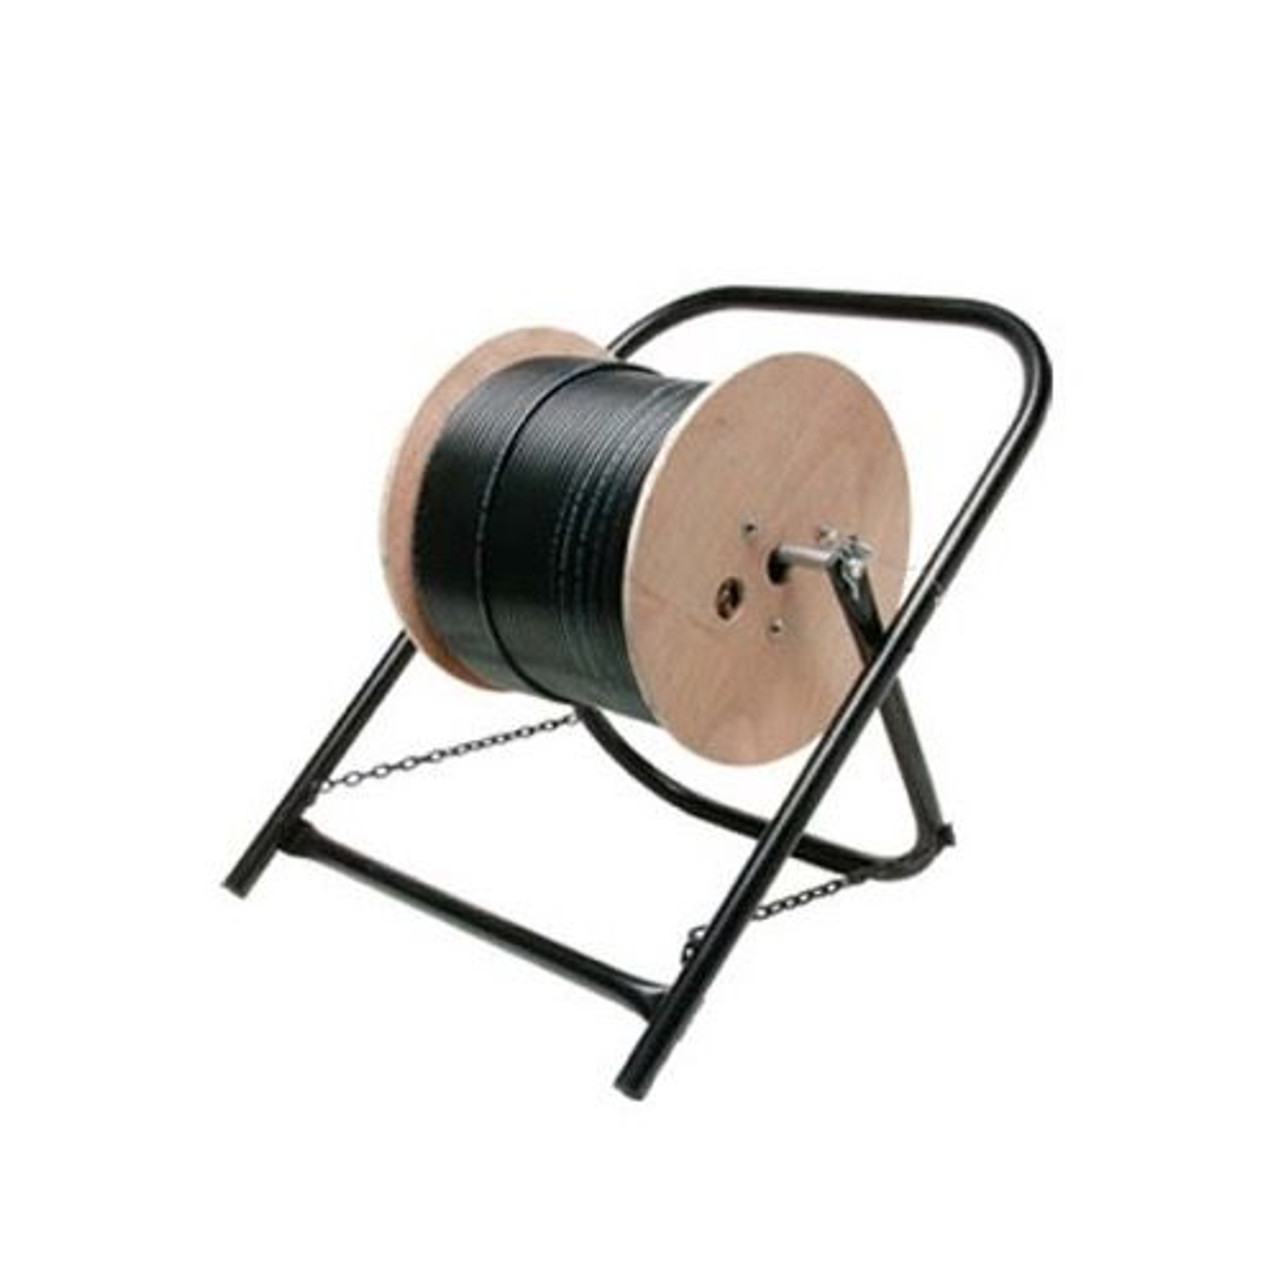 Steren 204-407 Cable Caddy Cart Spool Stand Cable Line Reel Dispenser Cart for Pulling Wires and Cable